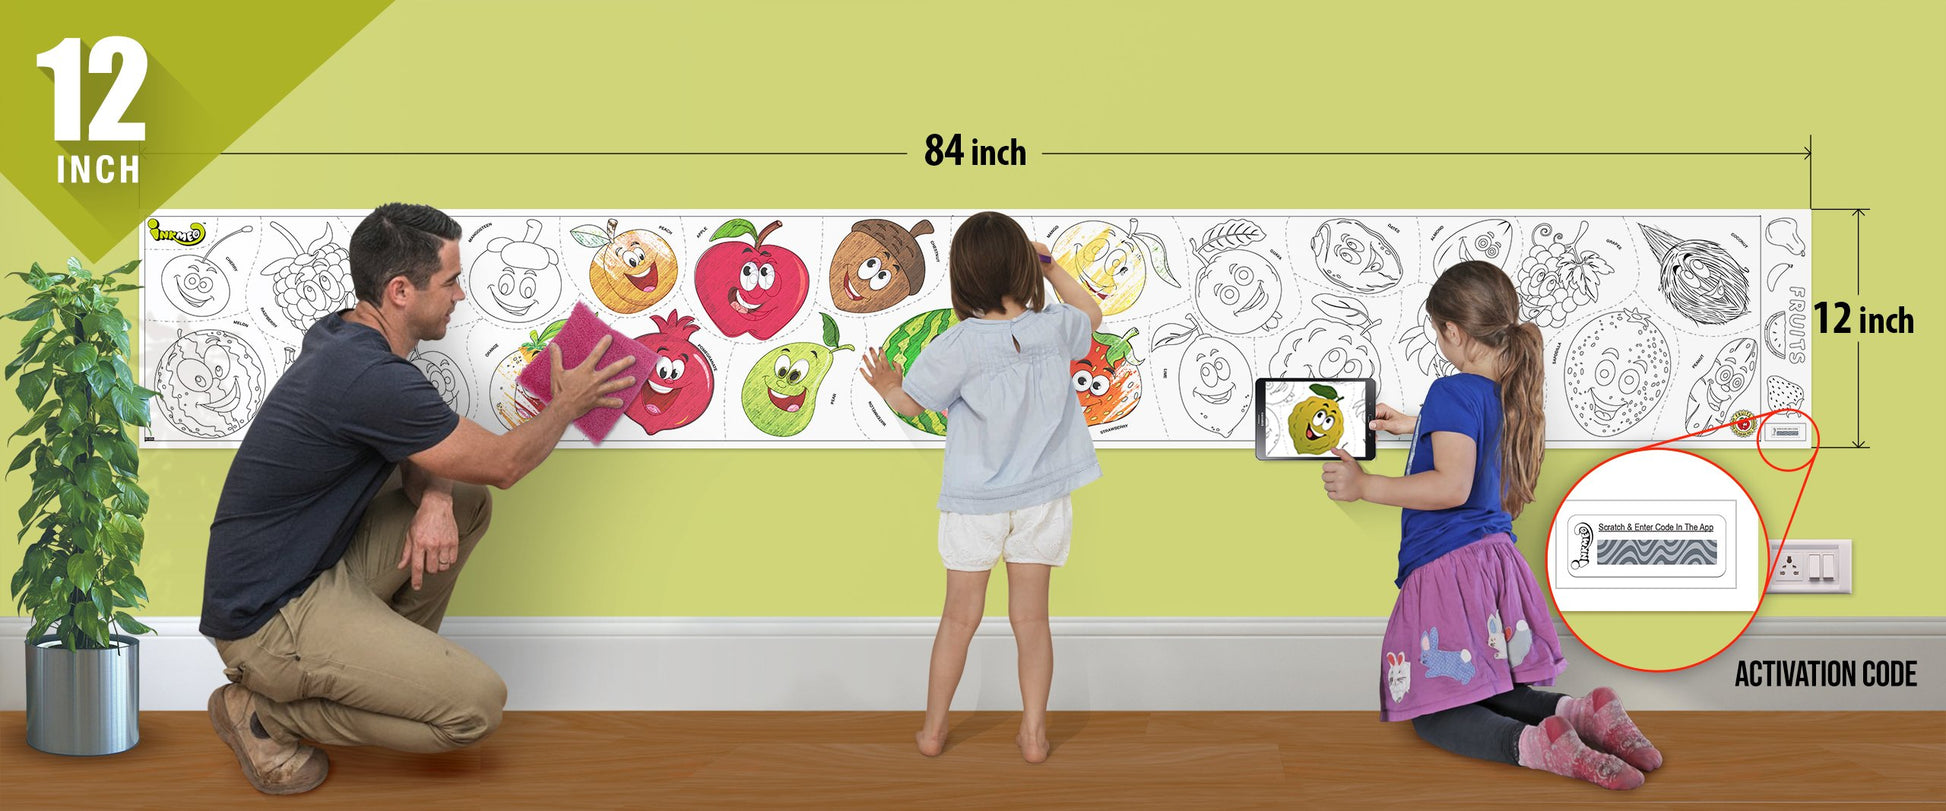 The image depicts a father and his two daughters enjoying a bonding moment while colouring fruits sheet attached to the wall.